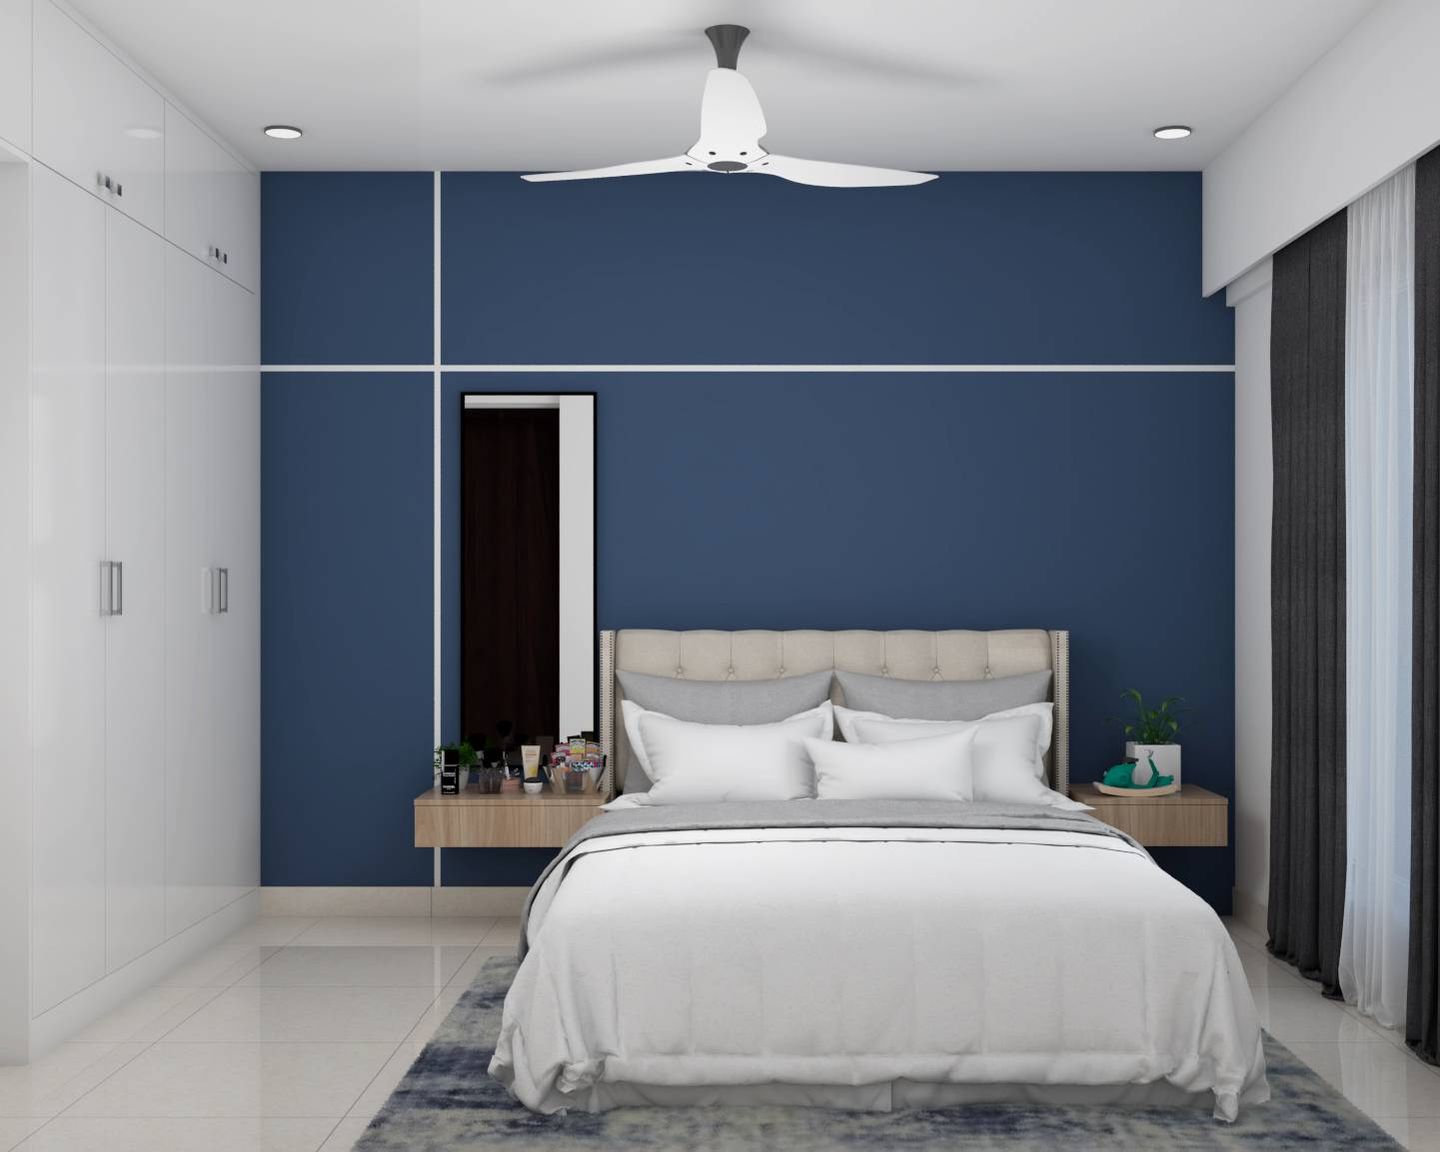 Exquisite Guest Bedroom With Blue and White Tones - Livspace